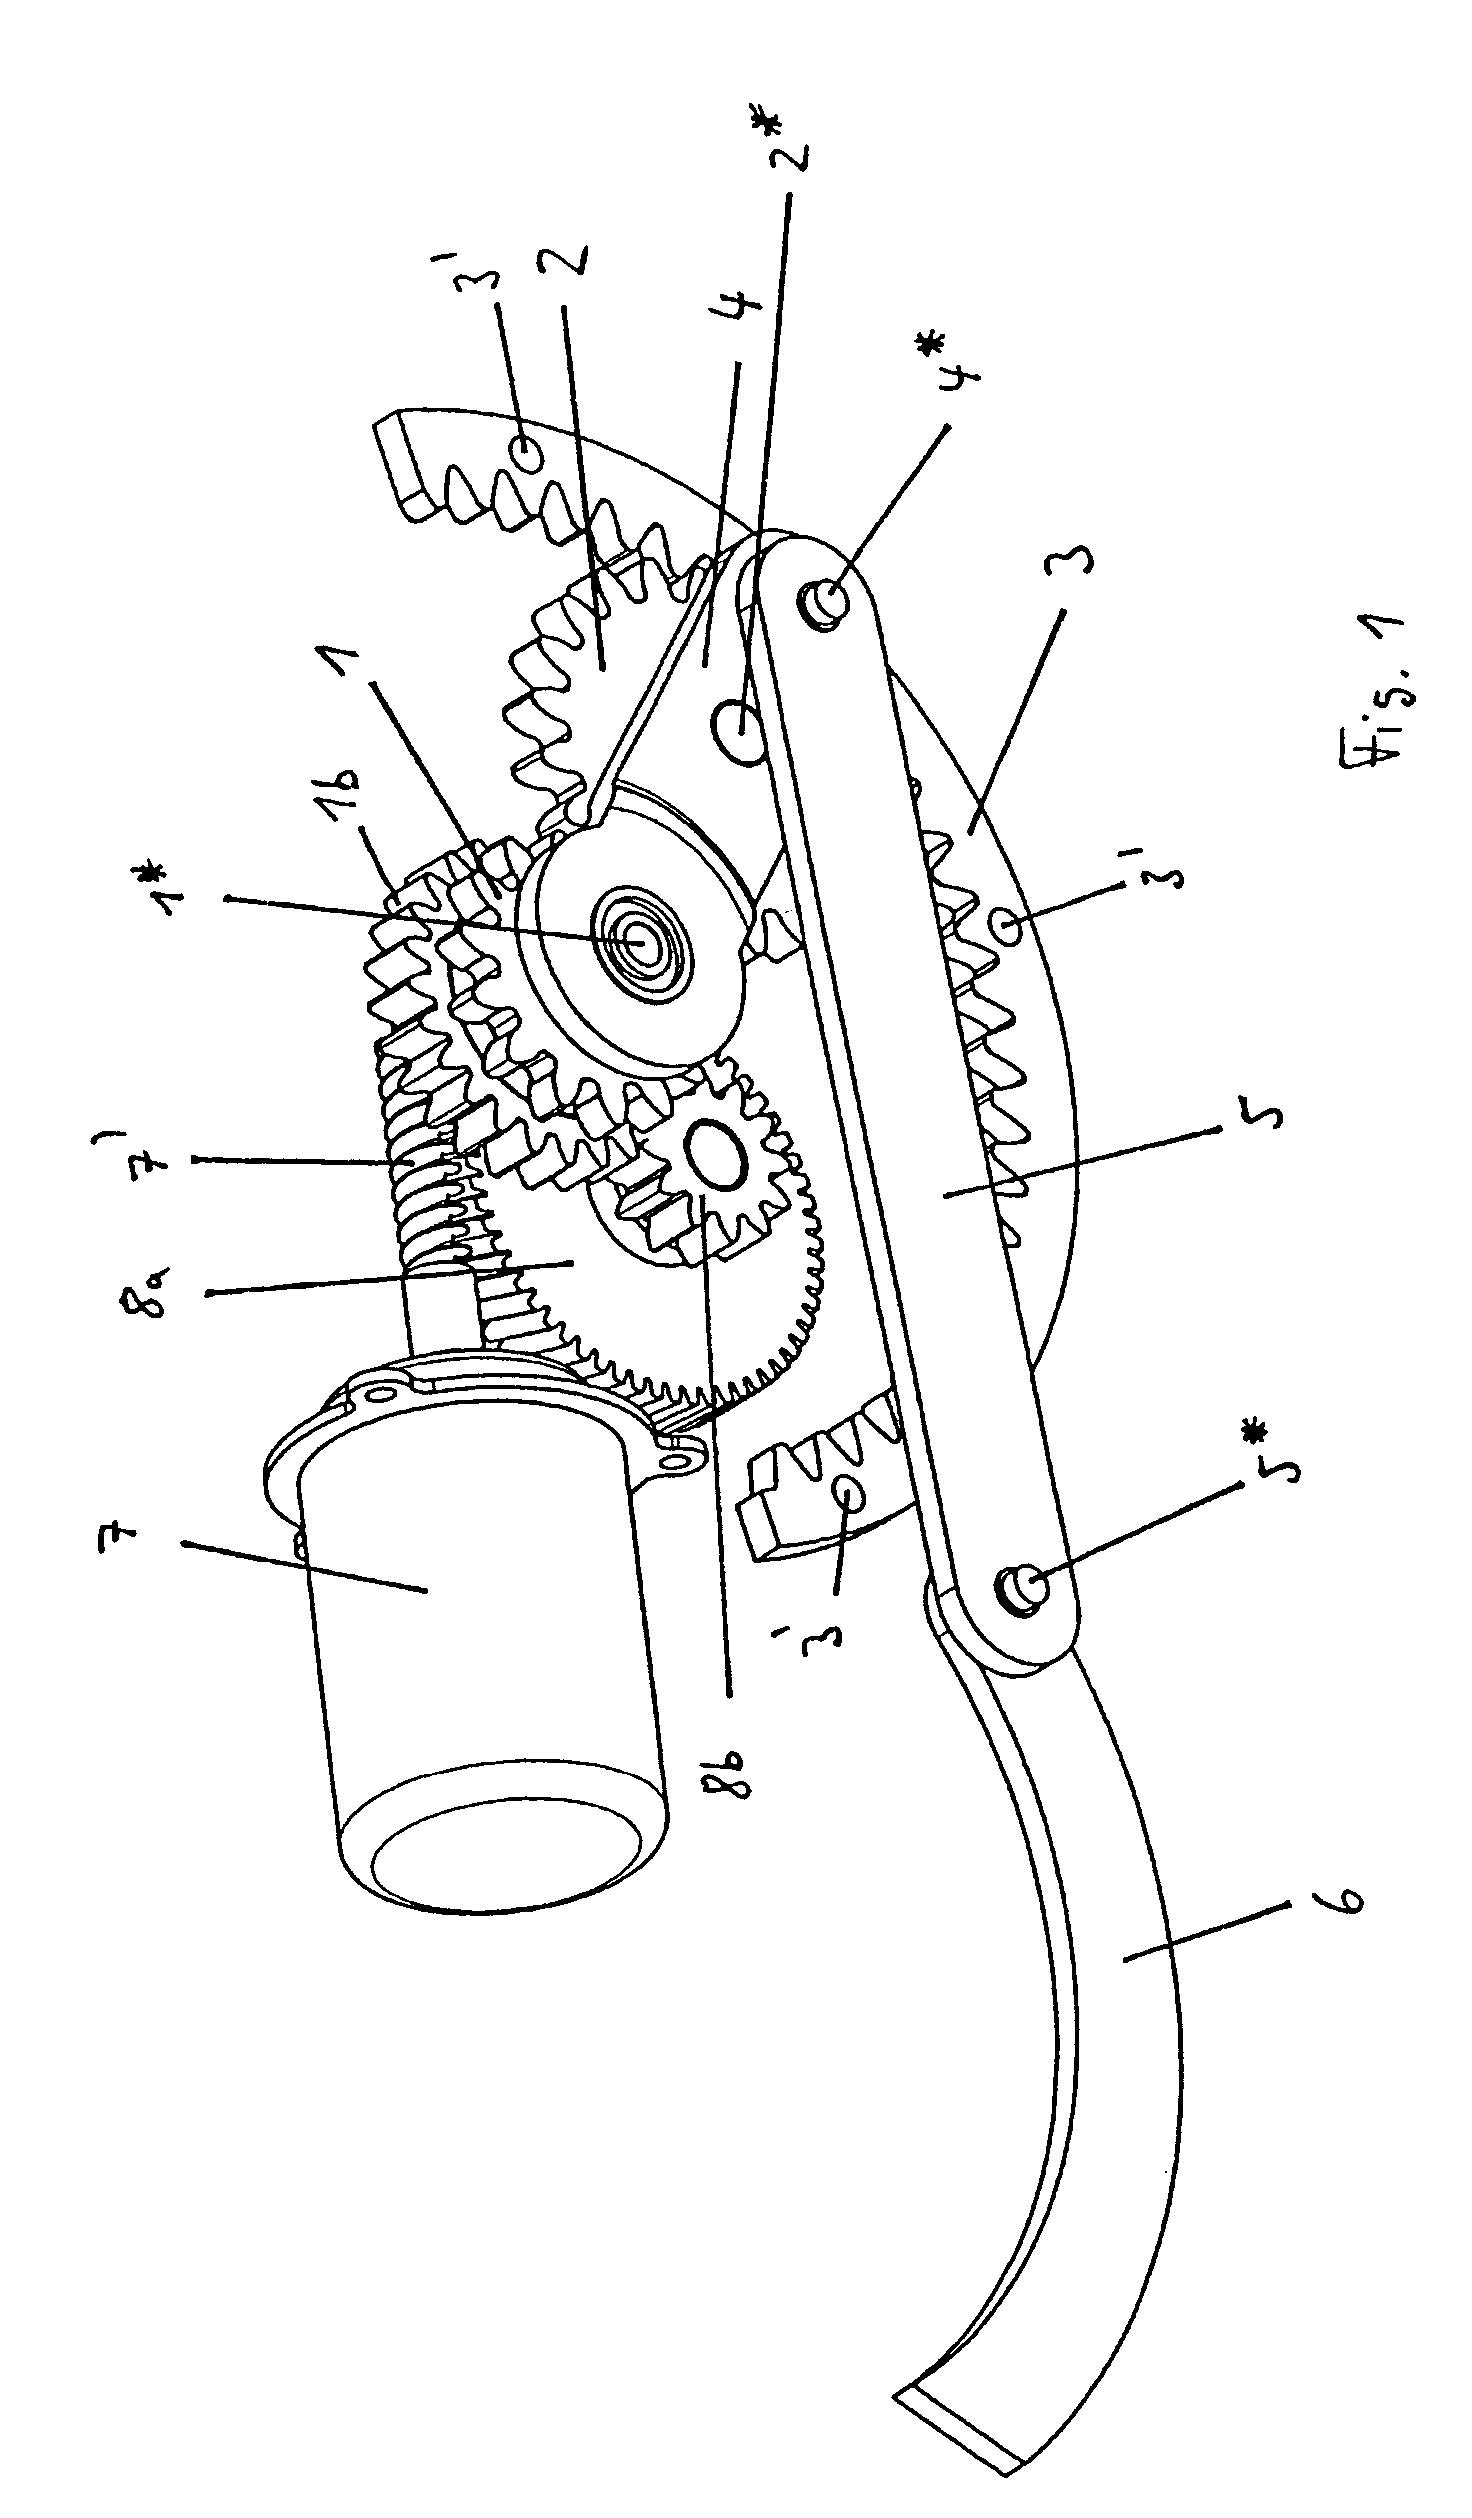 Servo drive for activating a tailgate of a motor vehicle